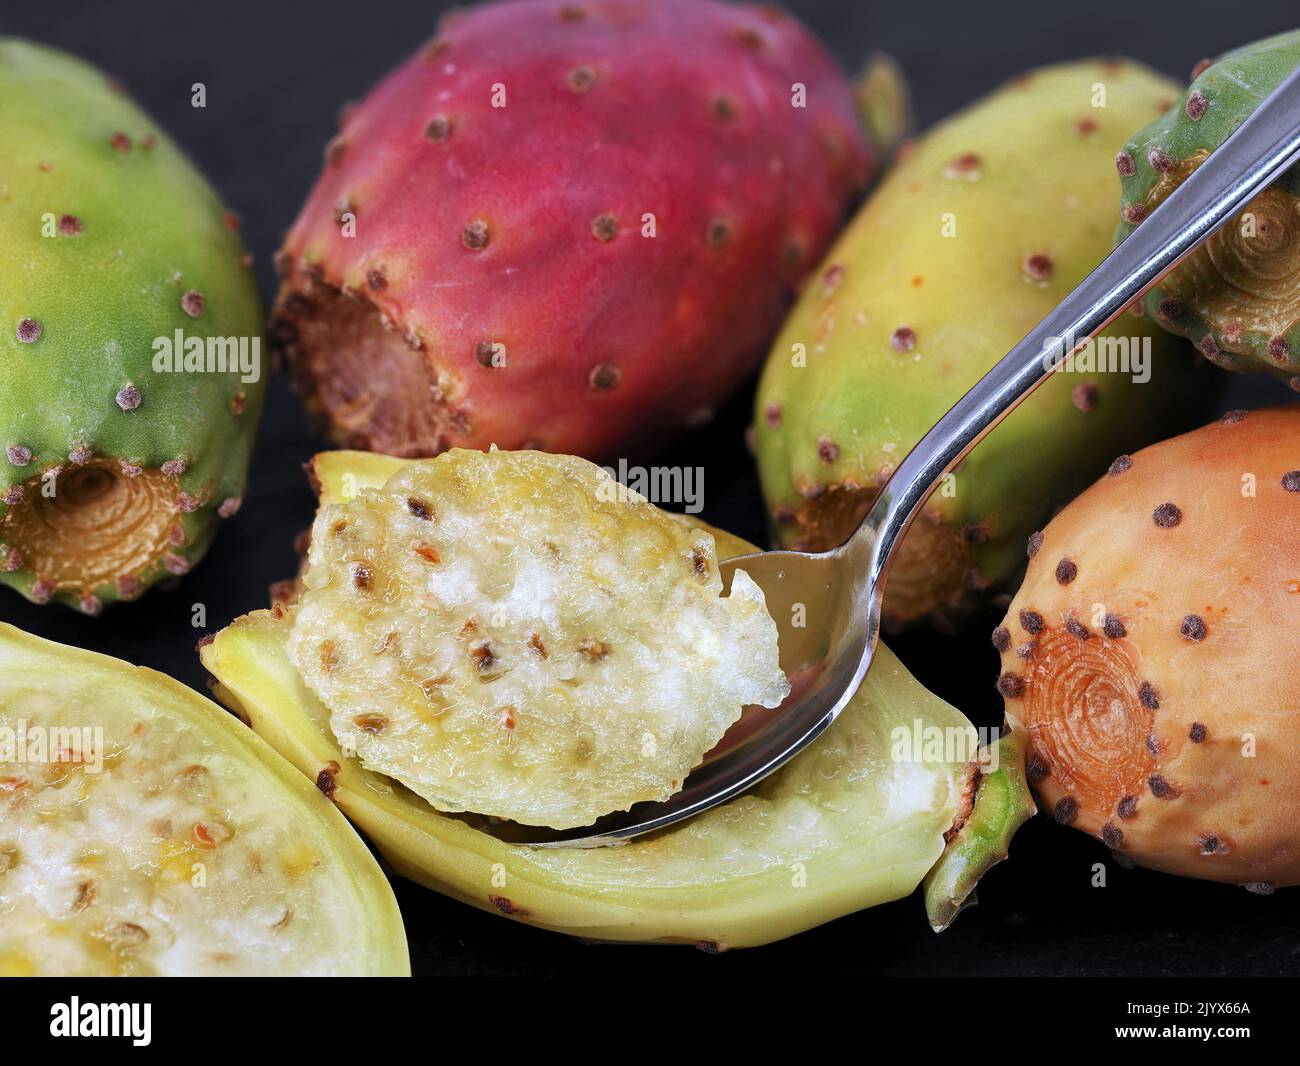 close up of a halved prickly pear cactus fig, opuntia fruit with spoon on black background Stock Photo